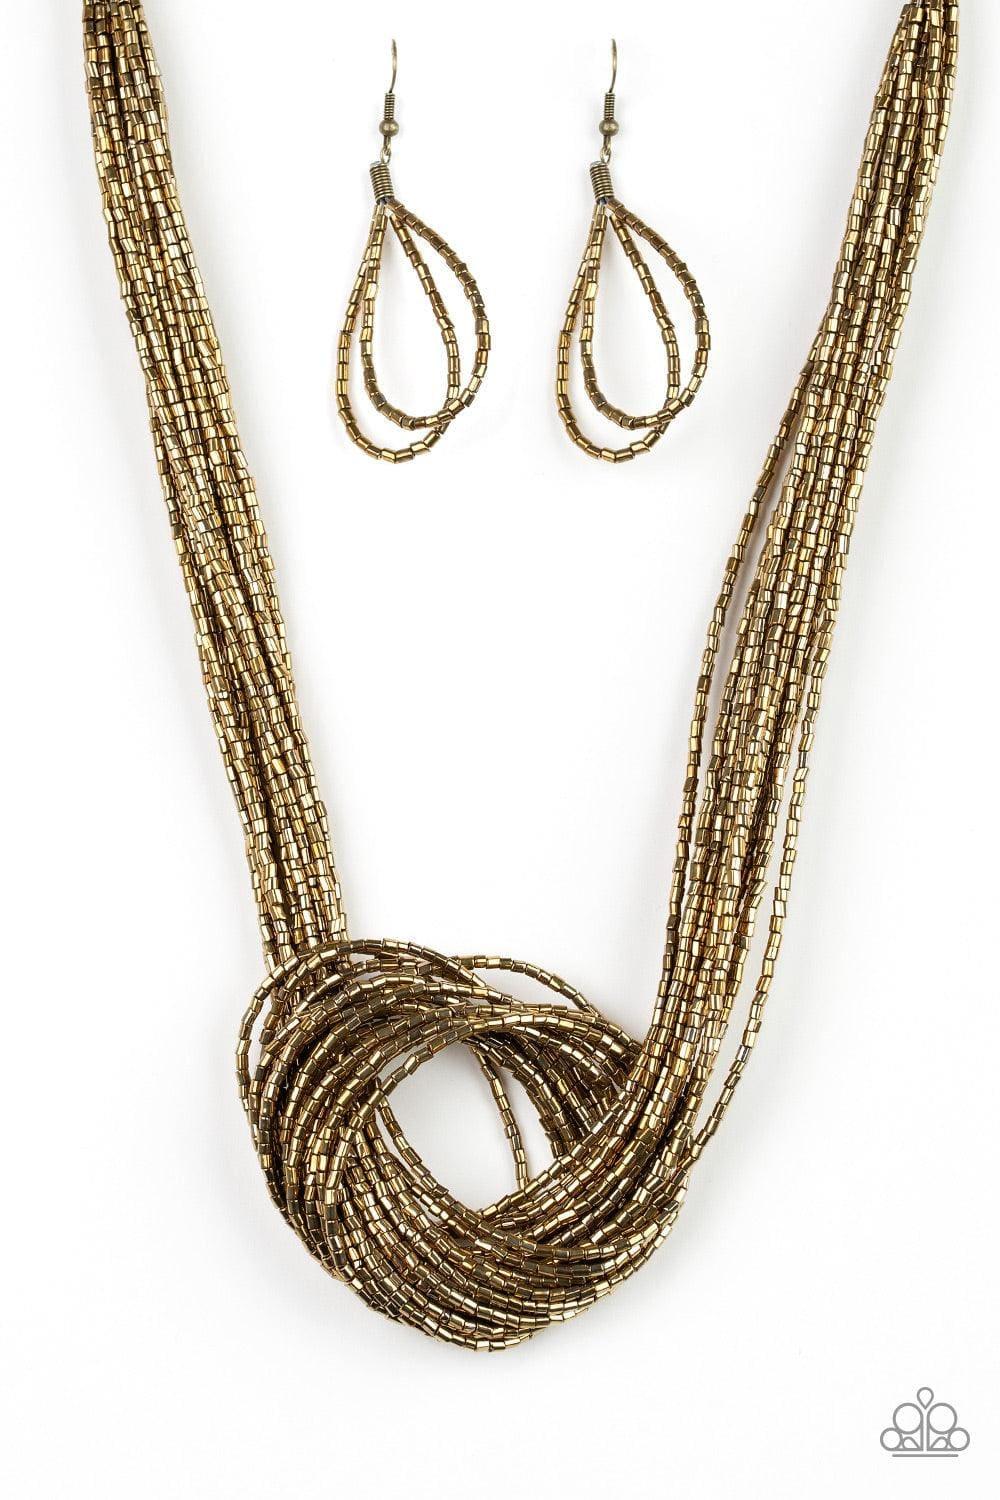 Paparazzi Accessories - Knotted Knockout - Brass Necklace - Bling by JessieK